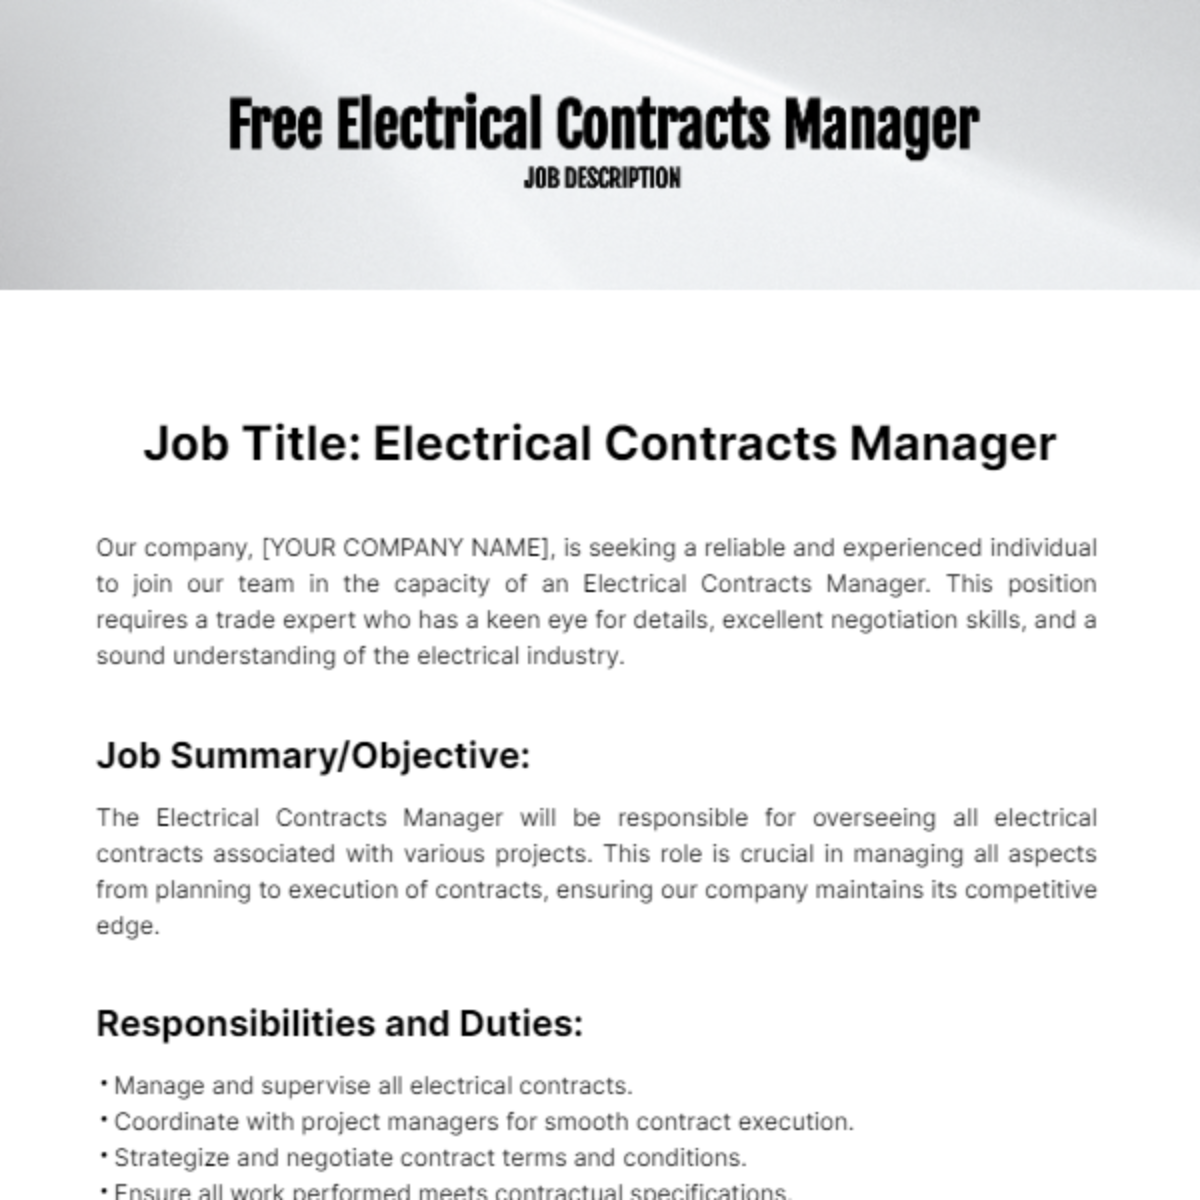 Electrical Contracts Manager Job Description Template